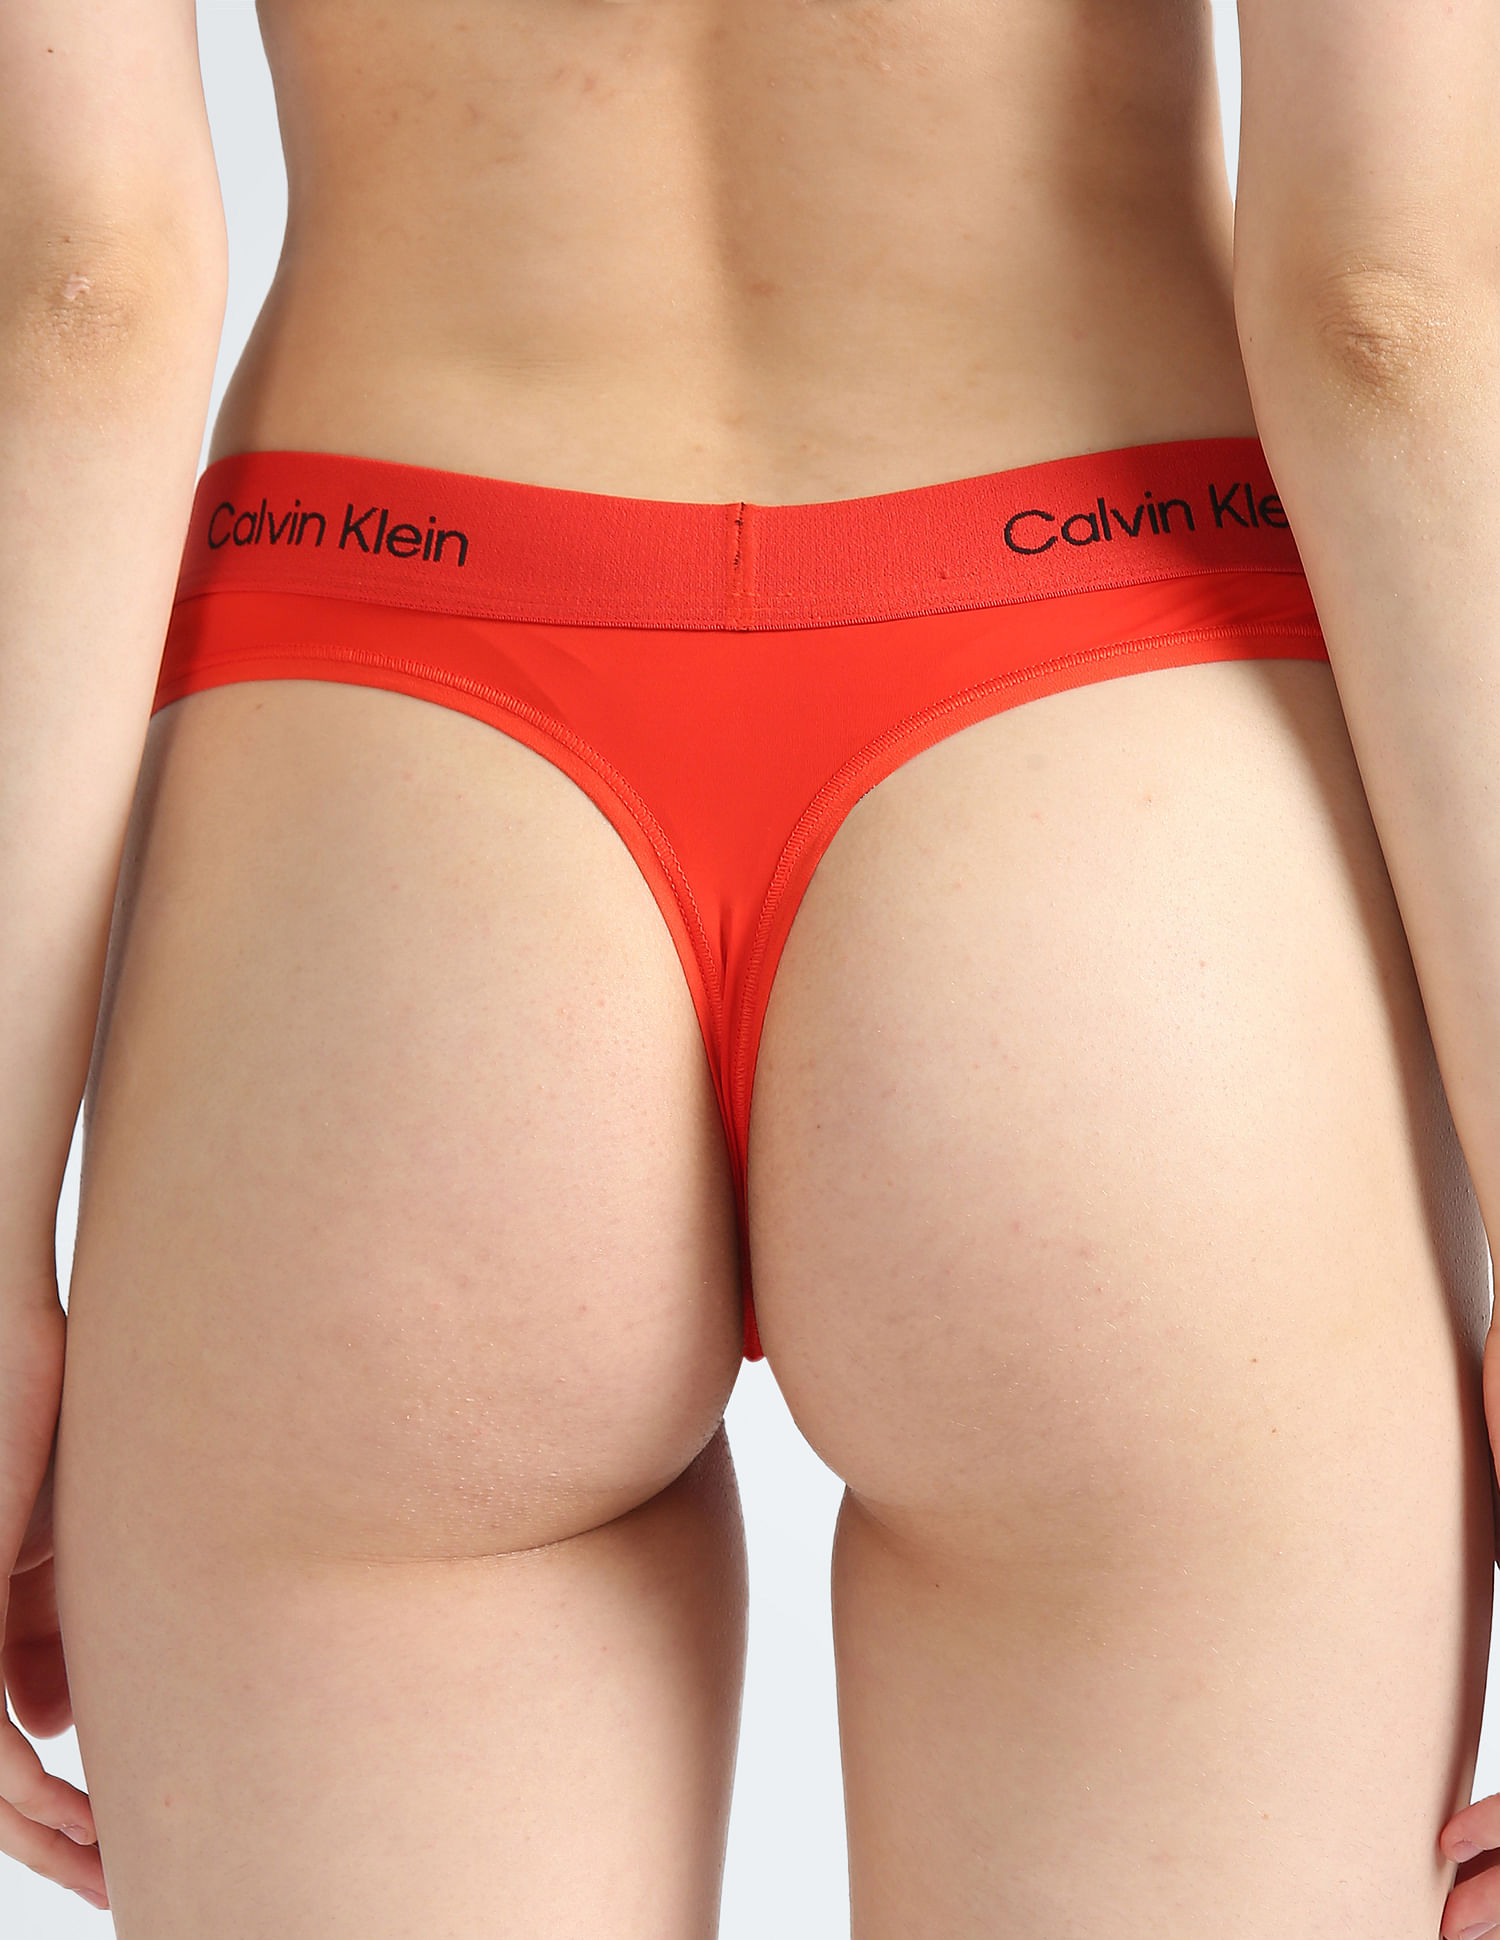 Bright Red Calvin Klein Thong Slip - Bright Red Calvin Klein Thong Slip -  iFunny Brazil